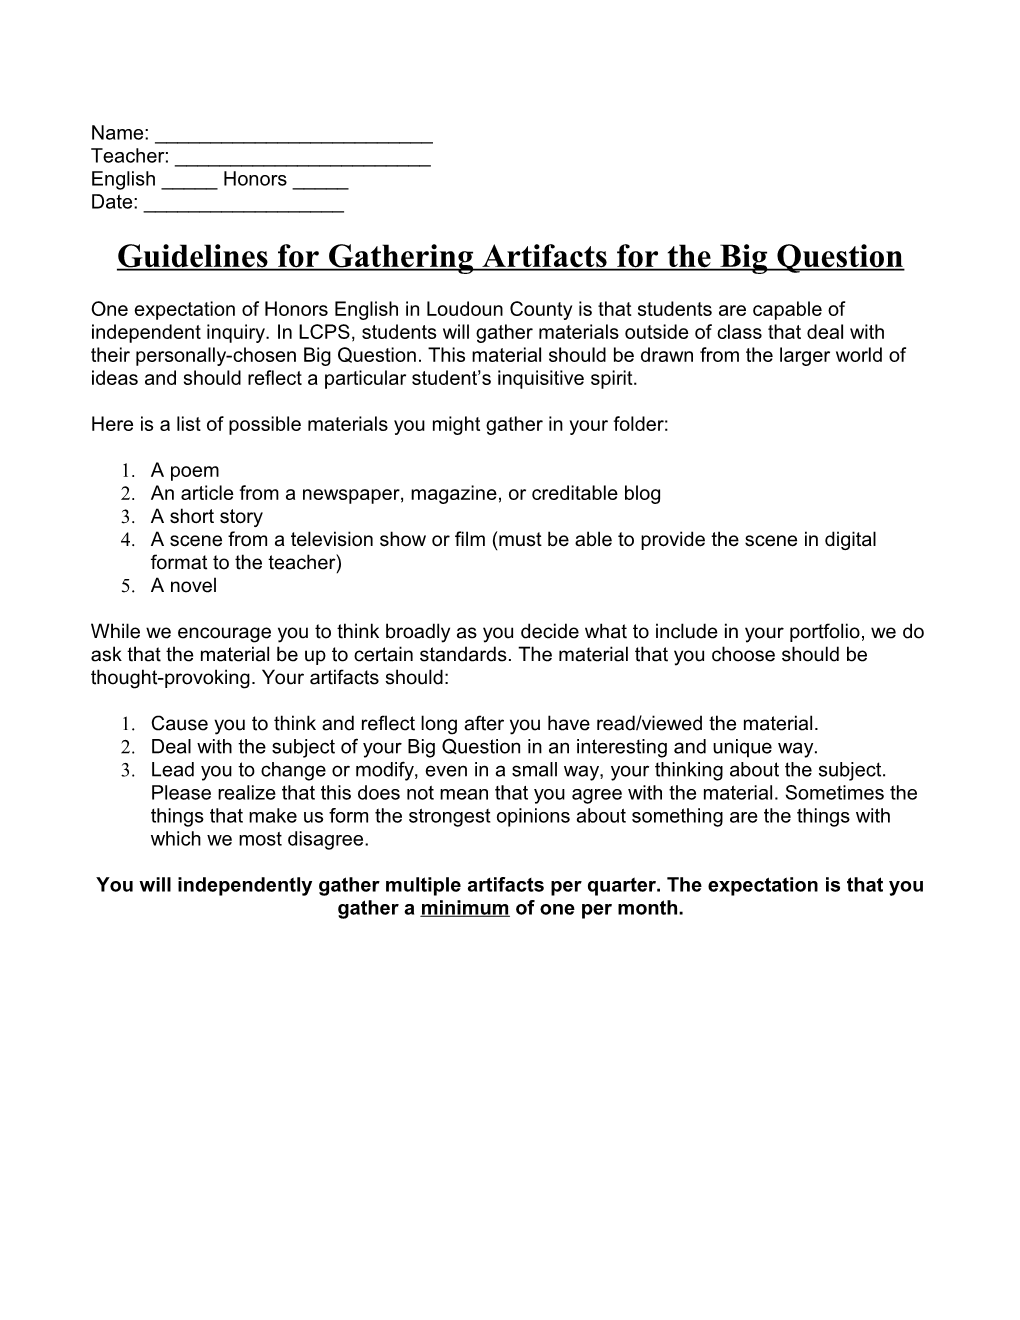 Guidelines for Gathering Artifacts for the Big Question